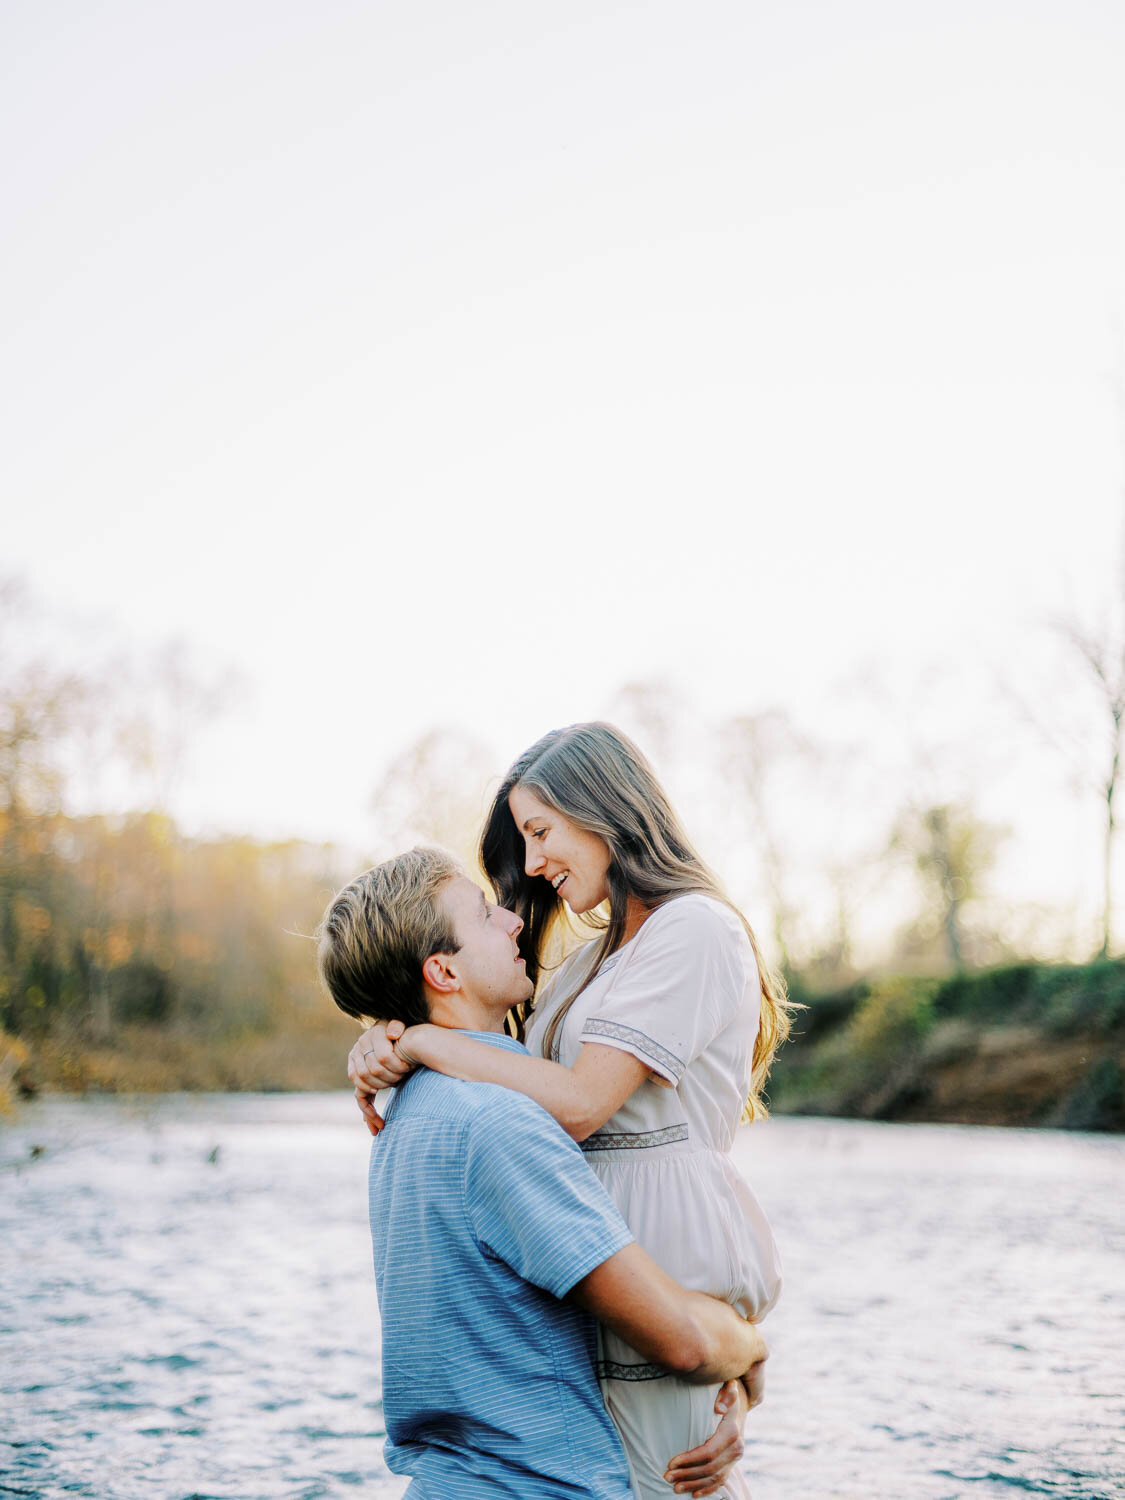 man-picking-up-woman-romantically-while-standing-in-rivanna-river-during-fall-engagement-session-at-golden-hour-in-charlottesville-virginia.jpg